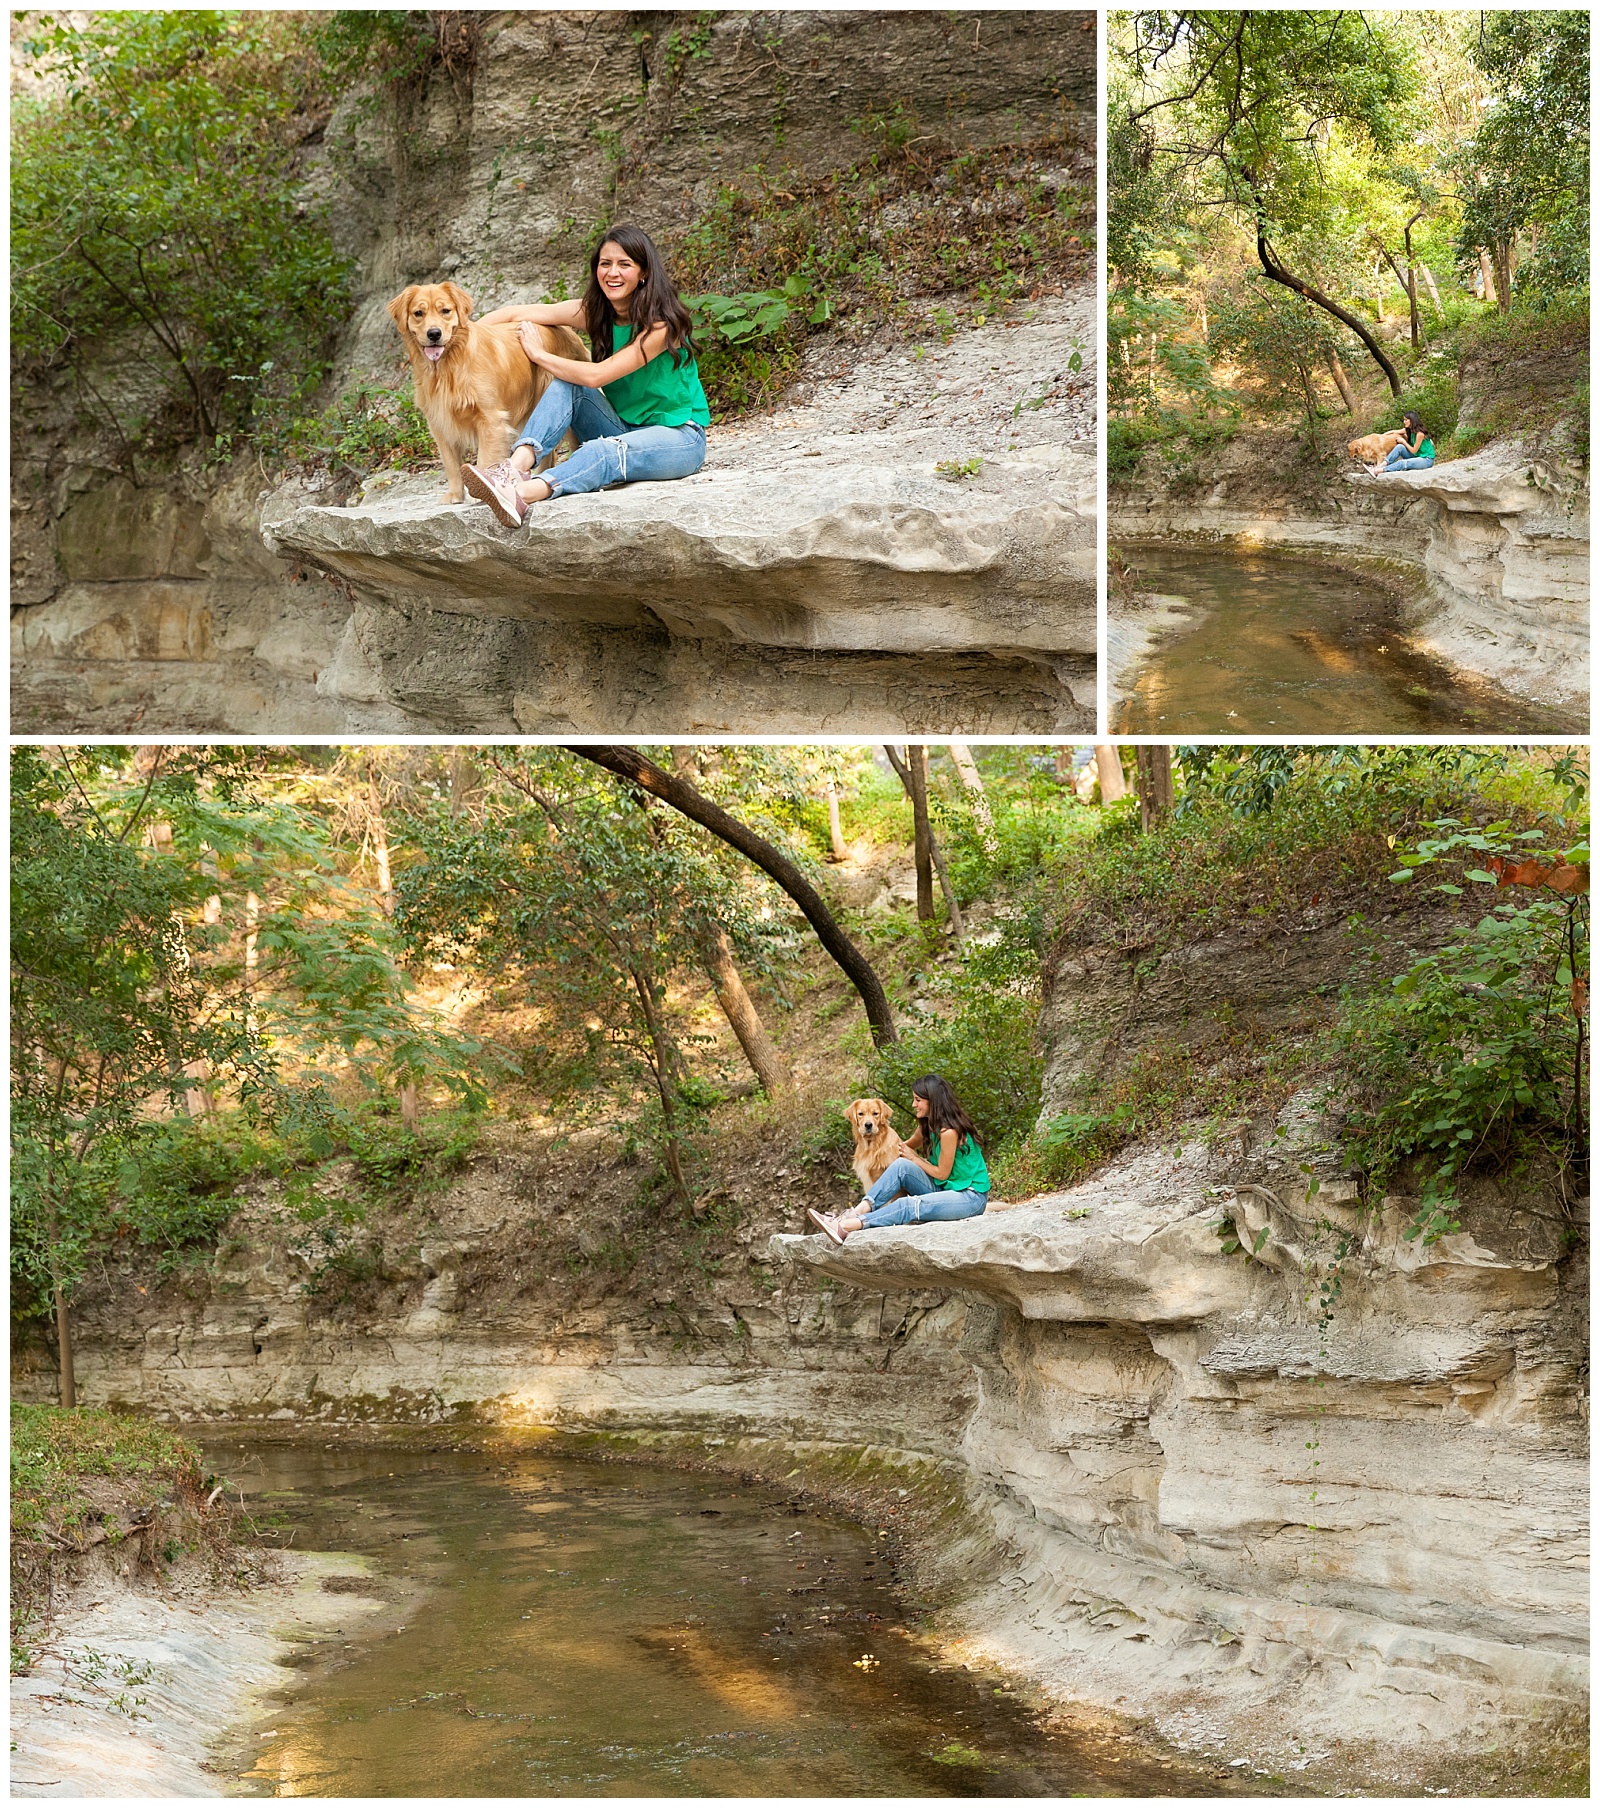 Casual photoshoot at Lakeside Park in Dallas Texas by Alyssa Grace Photography